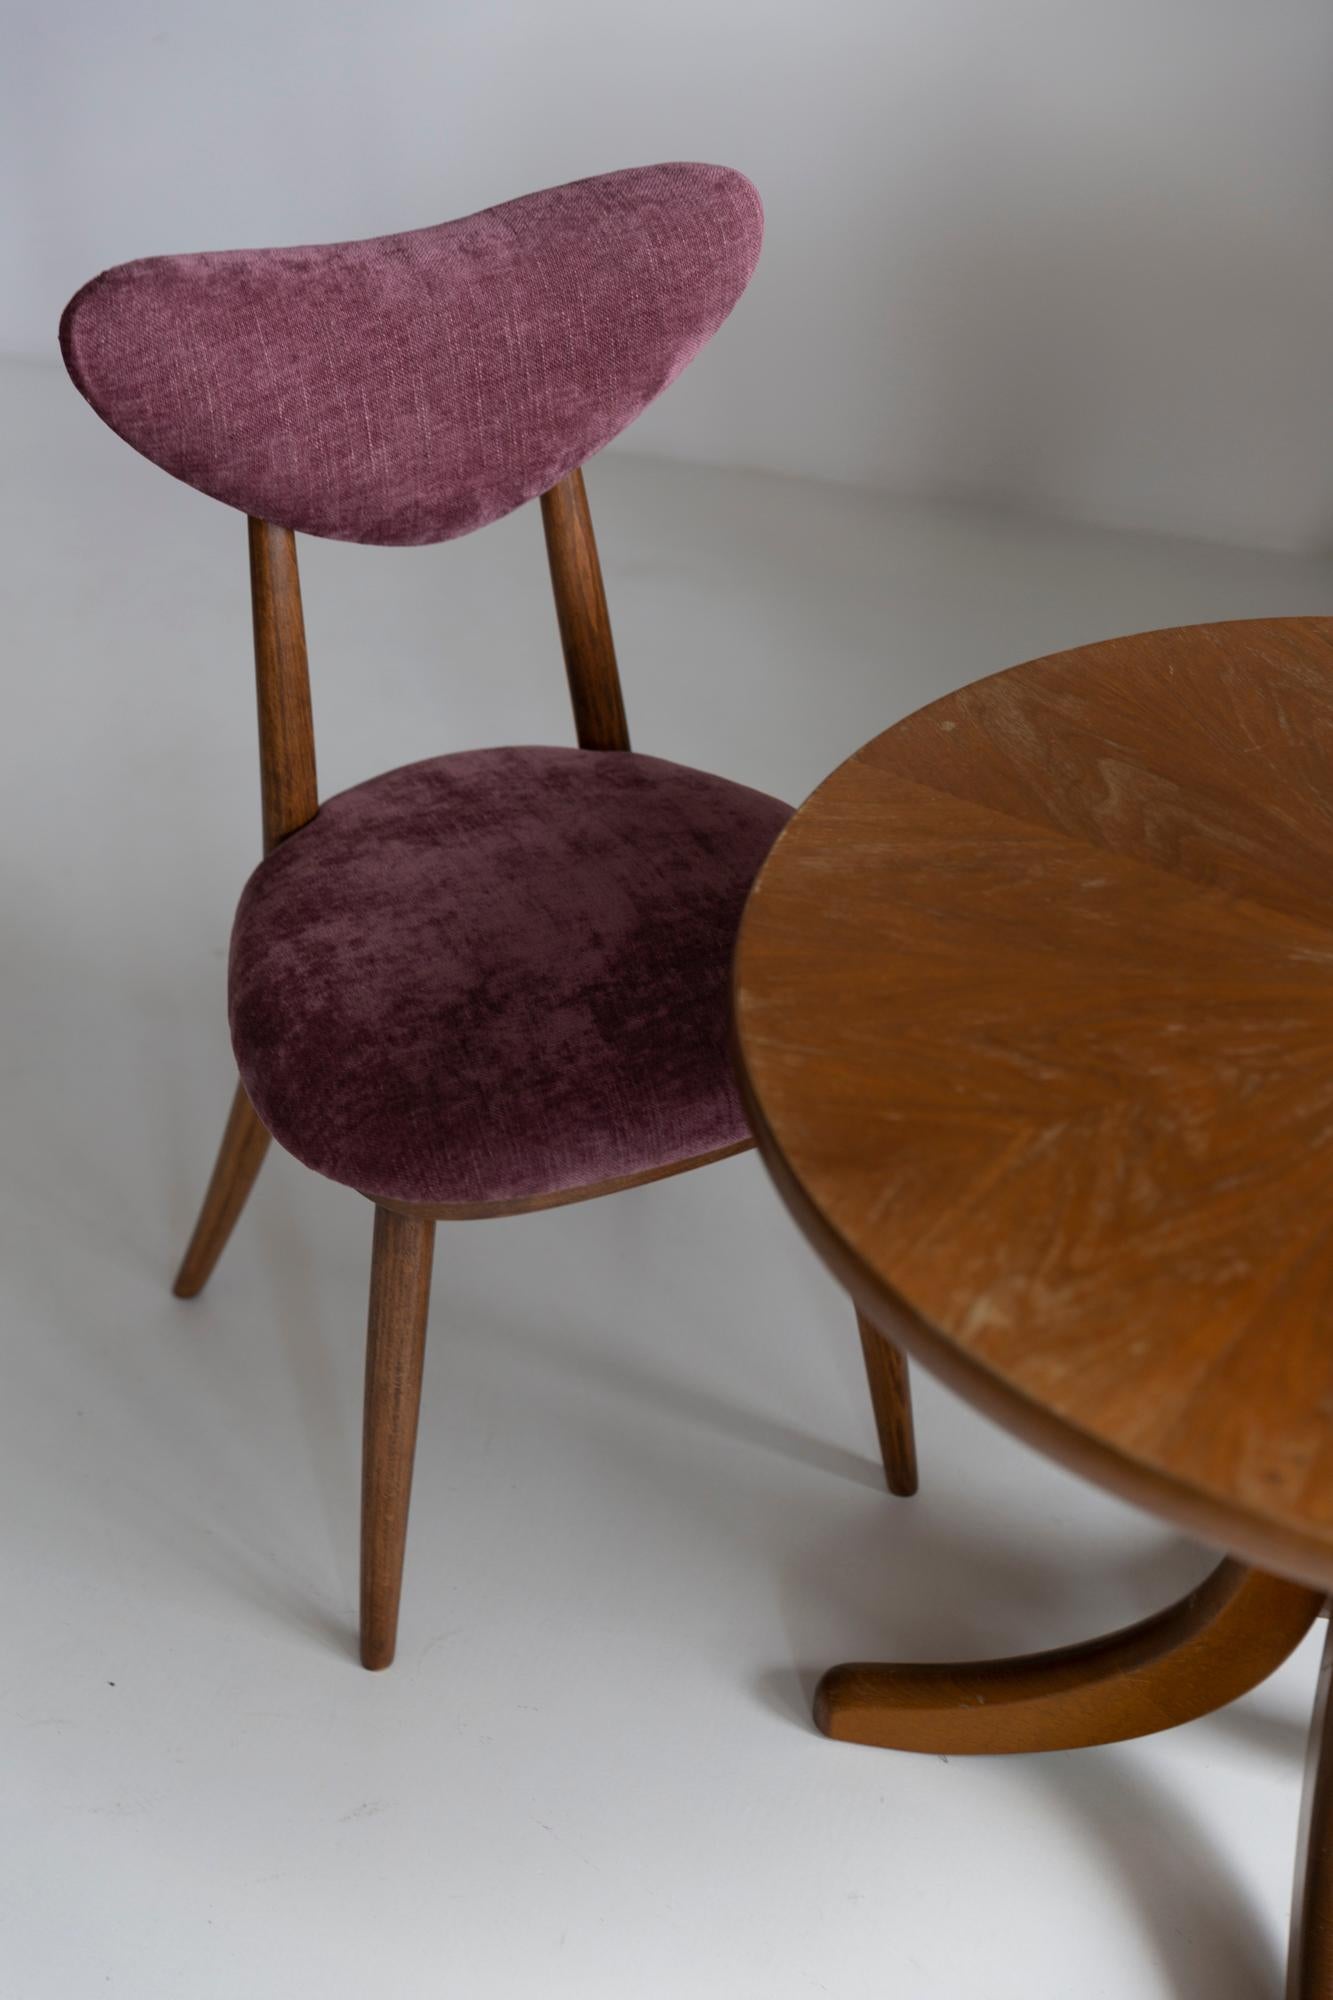 Hand-Crafted Midcentury Plum Violet Velvet, Walnut Wood Heart Chair, Europe, 1960s For Sale